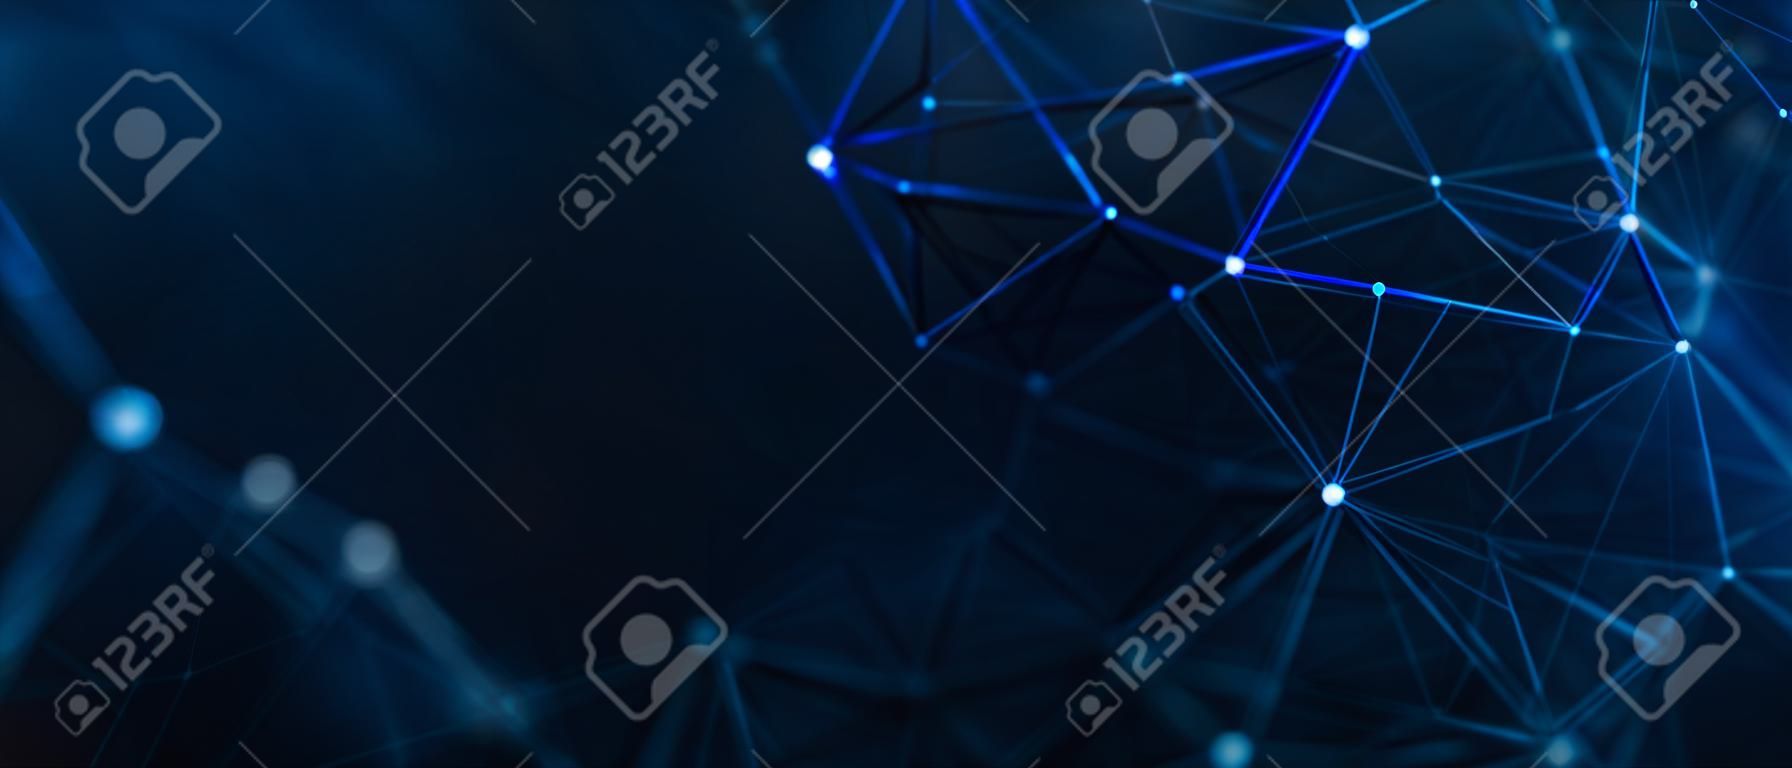 Abstract futuristic - technology with polygonal shapes on dark blue background. Design digital technology concept. 3d illustration	